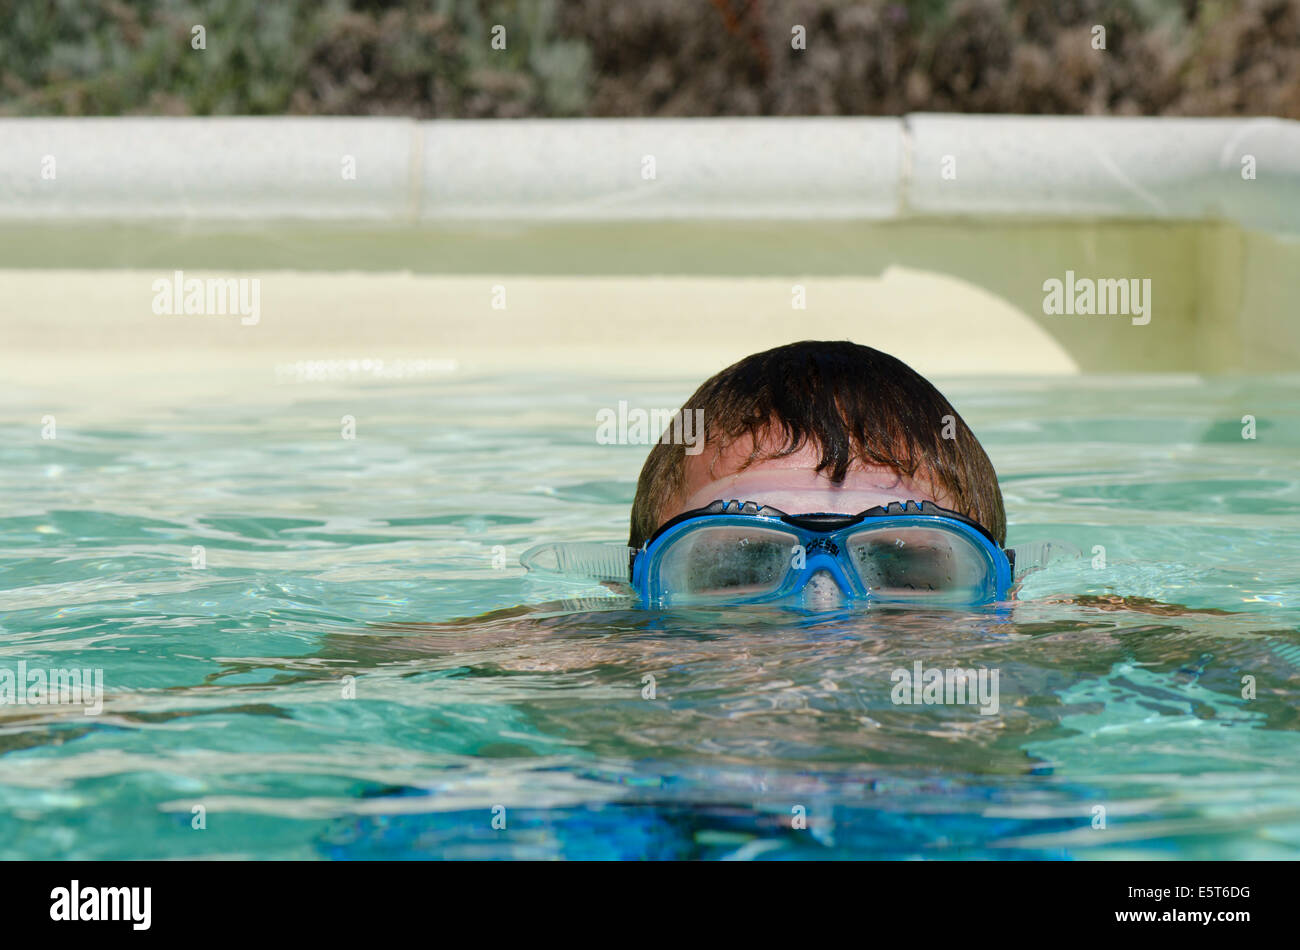 Teenager boy submerged wearing diving mask or goggles in swimming pool. Stock Photo